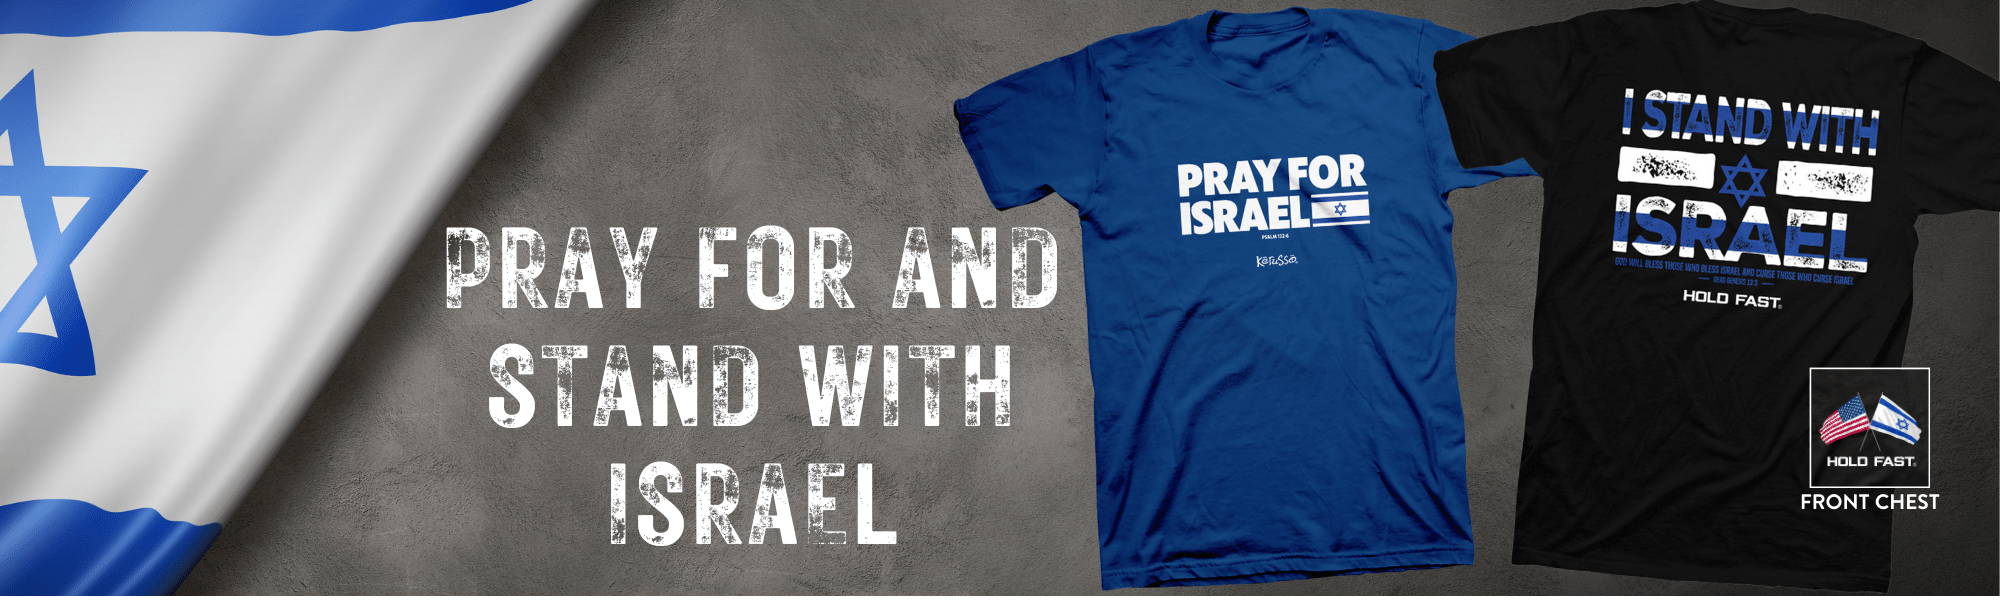 Pray For And Stand With Israel